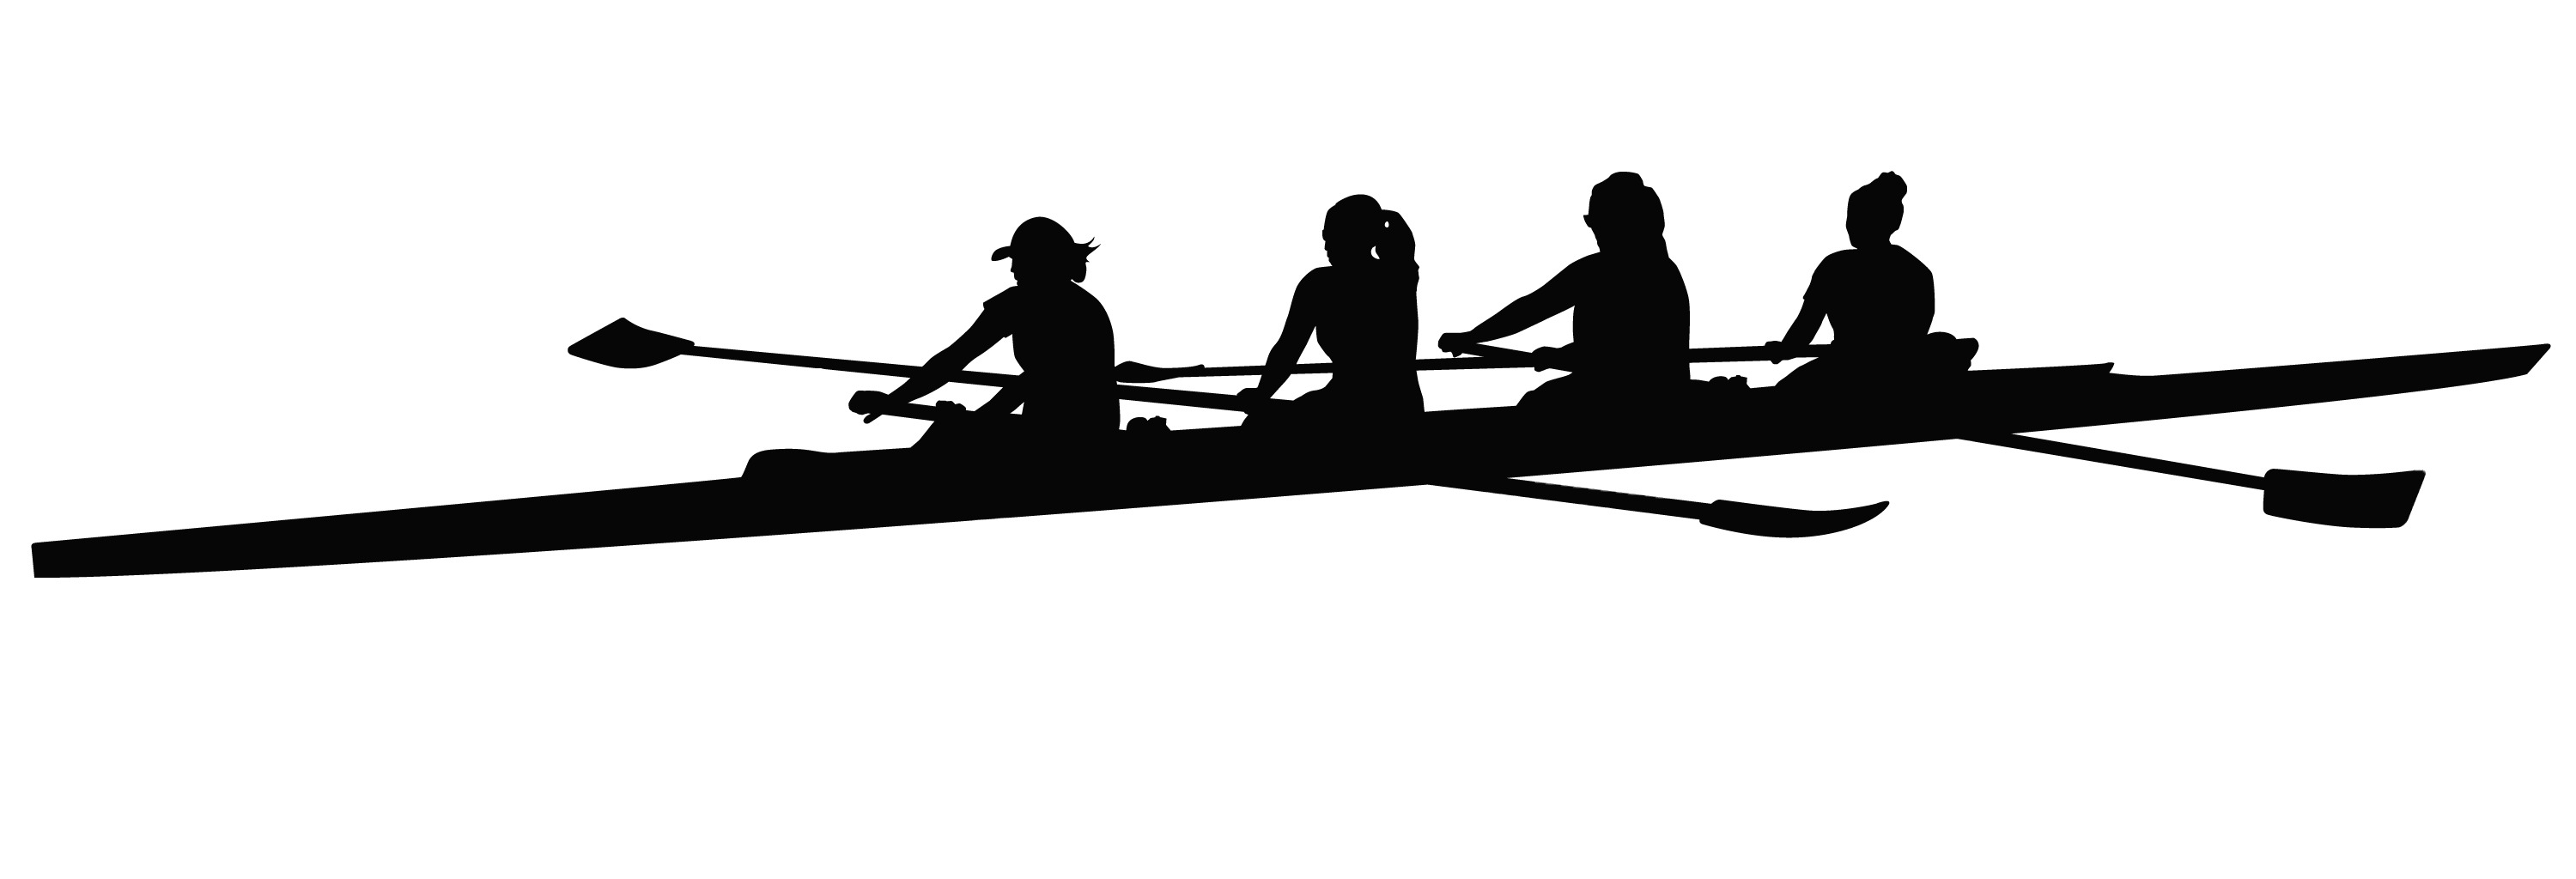 Rowing Team Silhouette icons